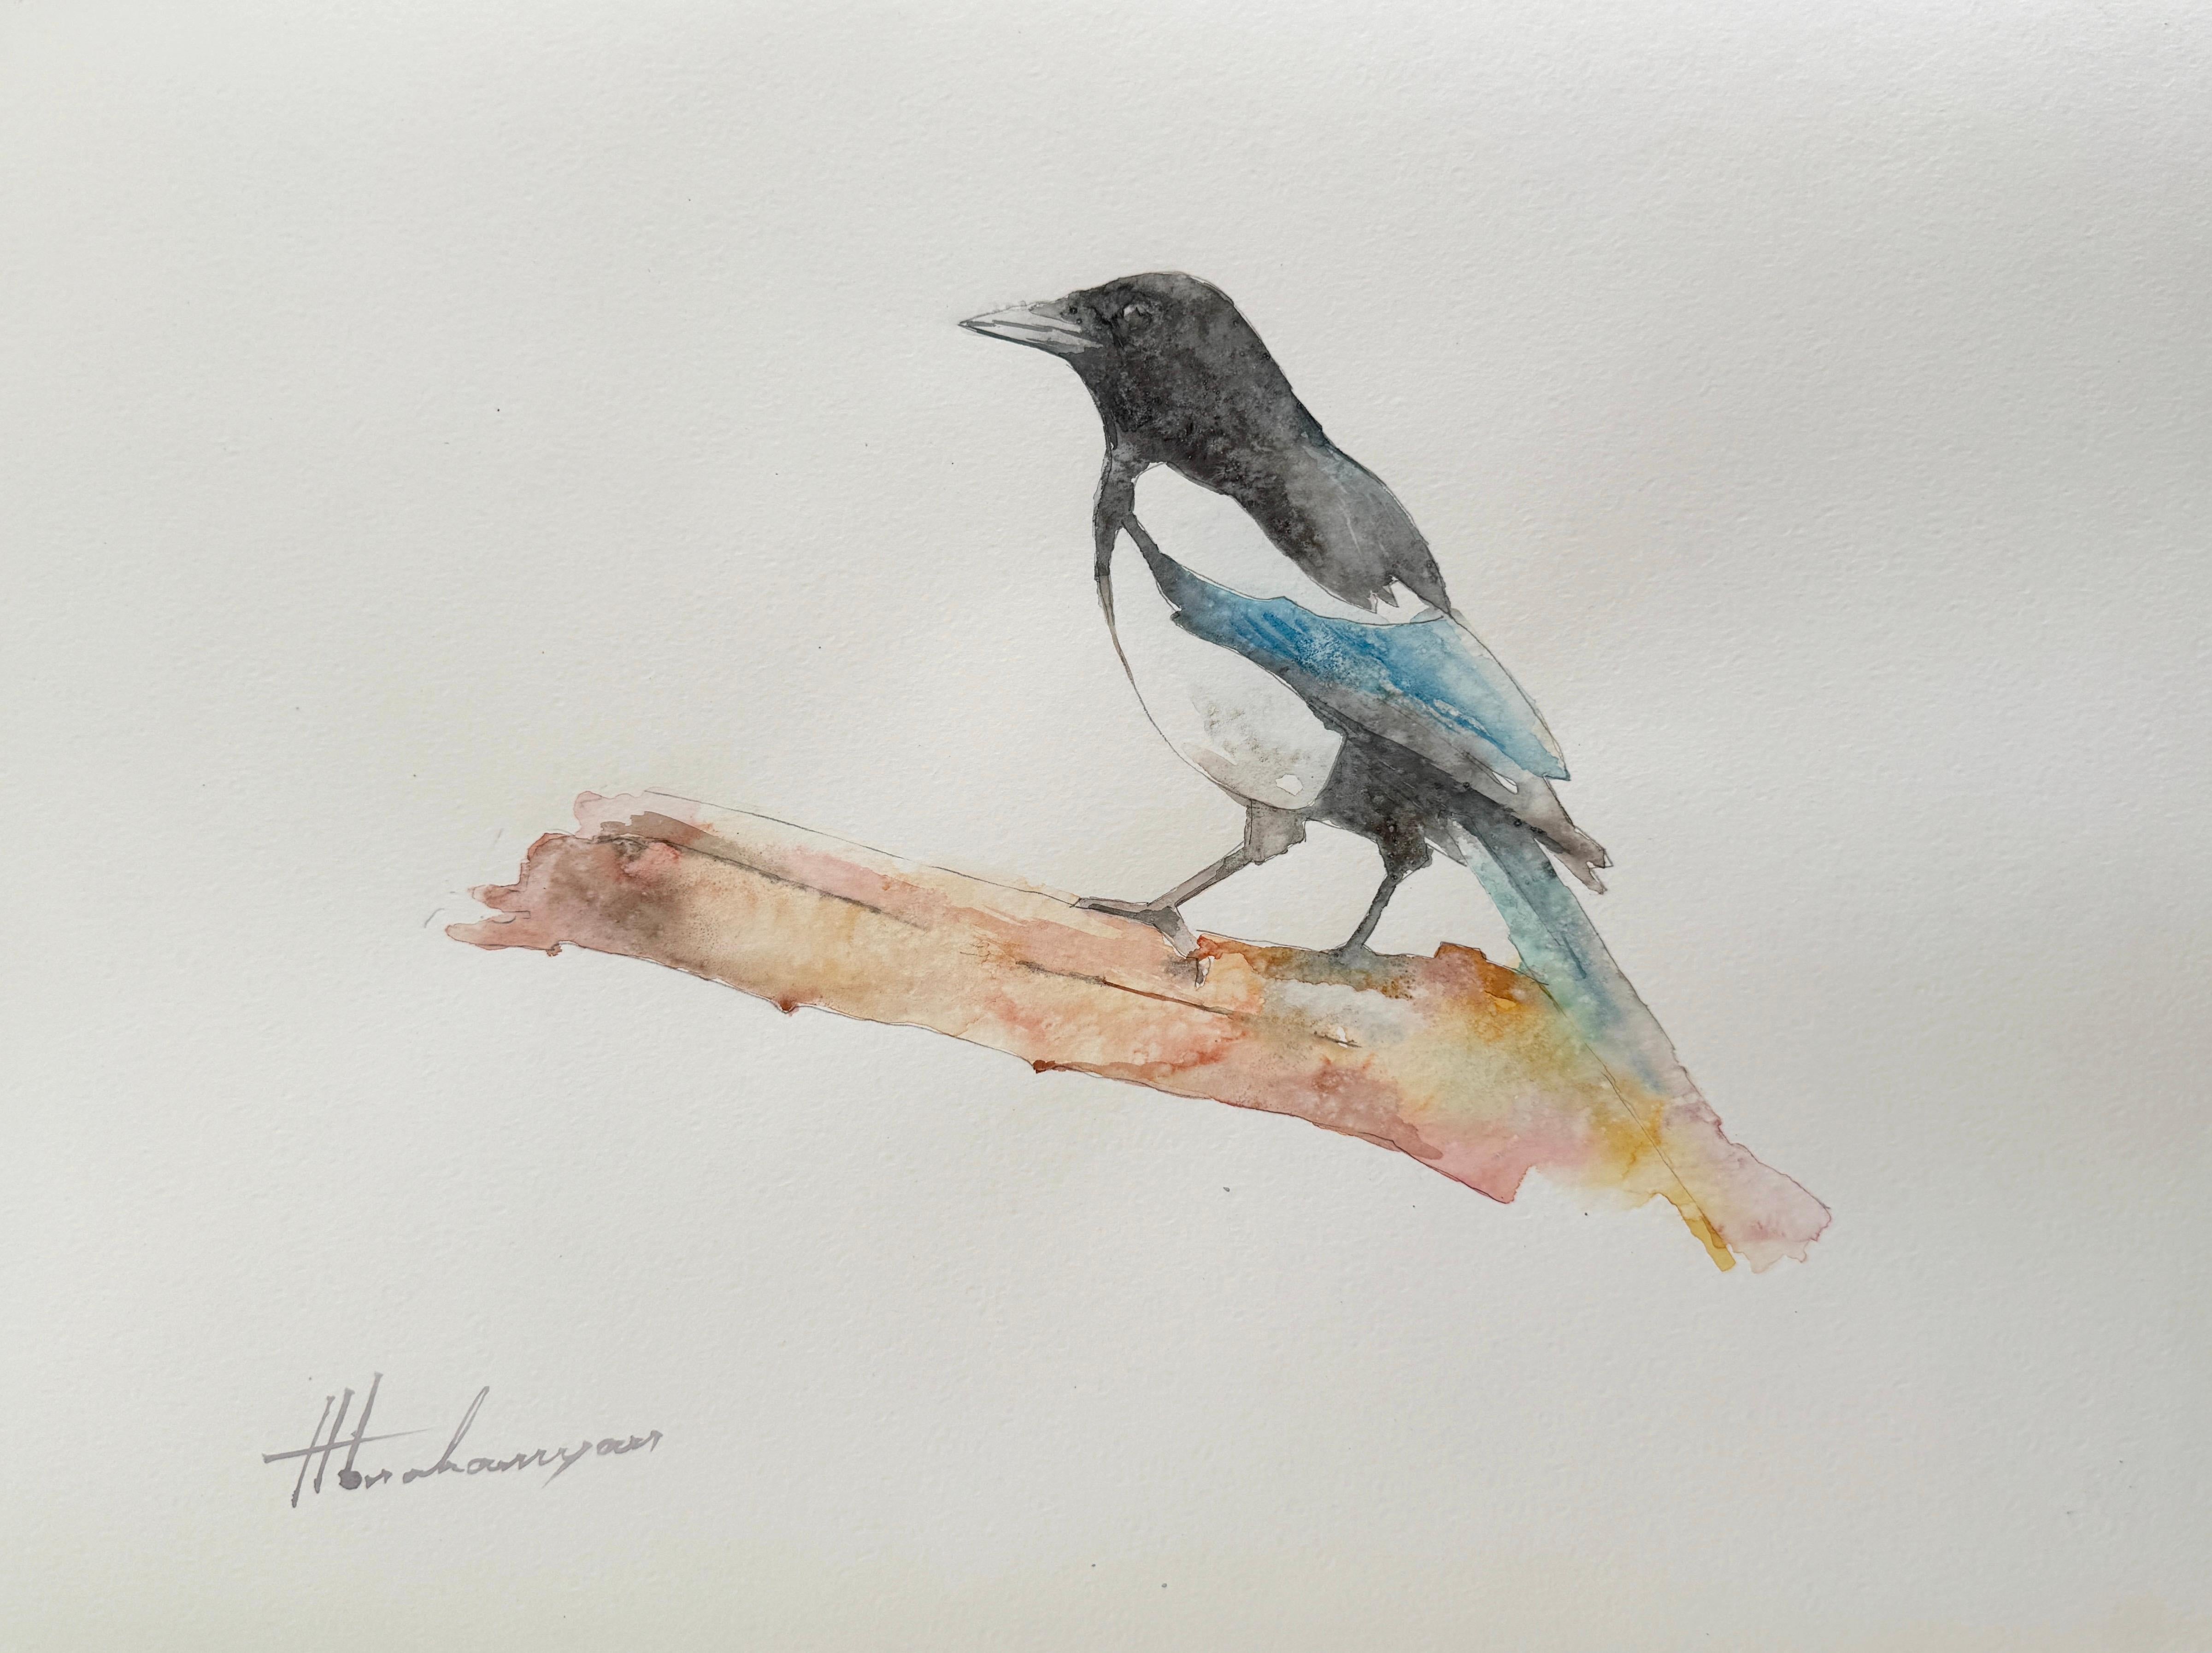 Artyom Abrahamyan Animal Art - Magpie, Bird, Watercolor Handmade Painting, One of a Kind